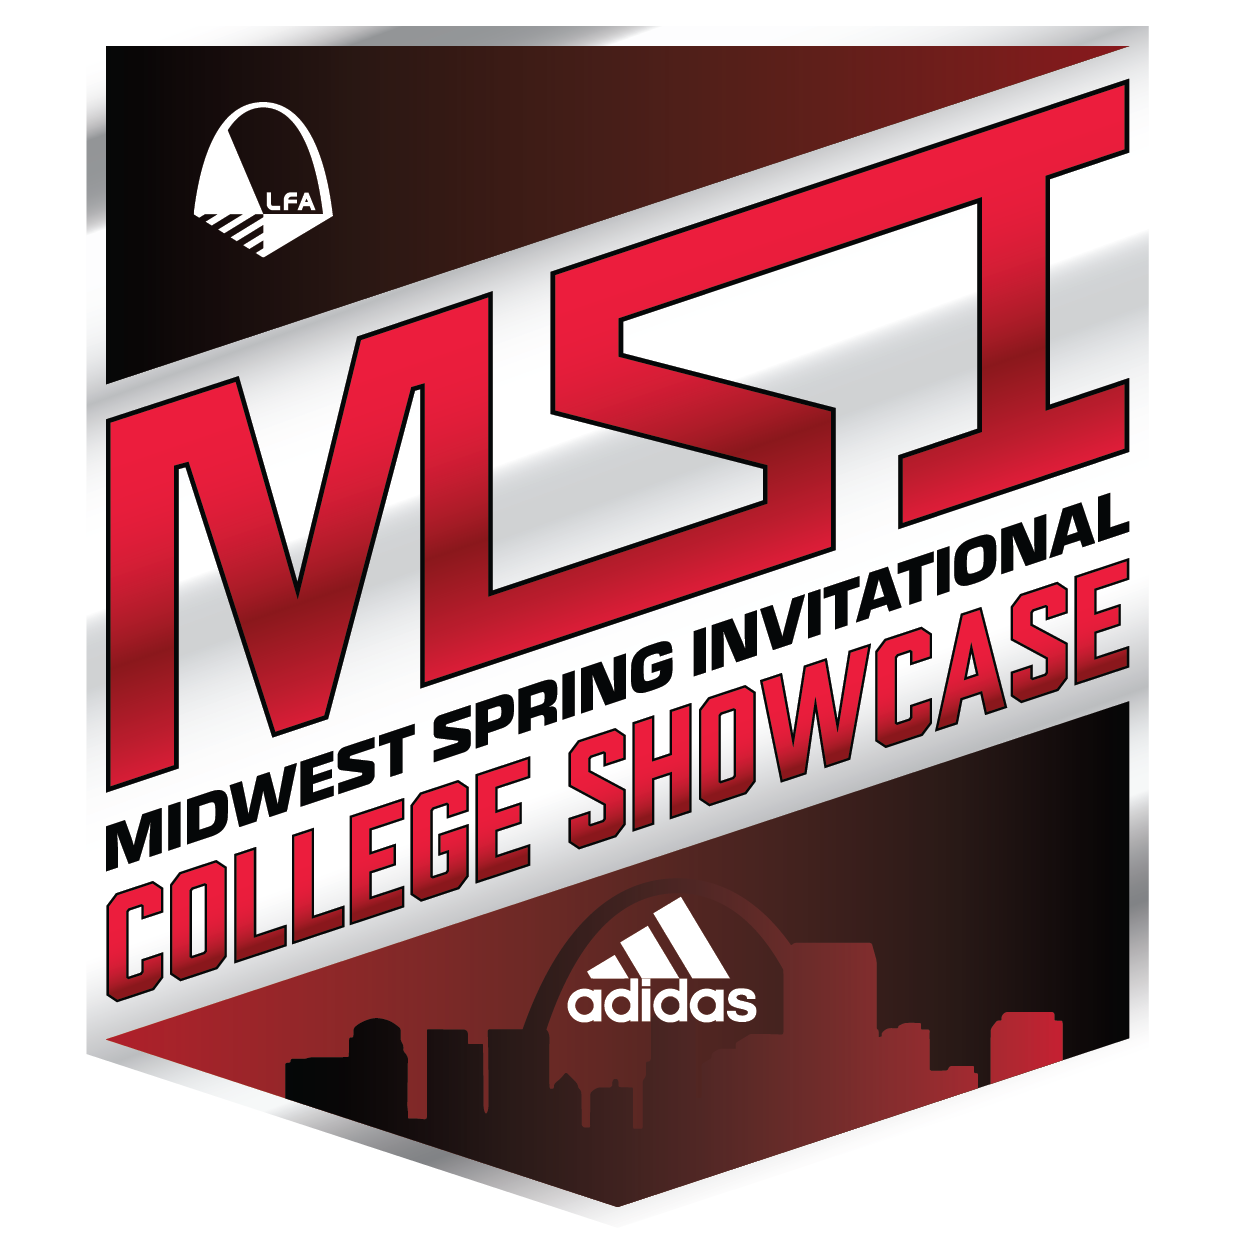 Midwest Spring Invitational